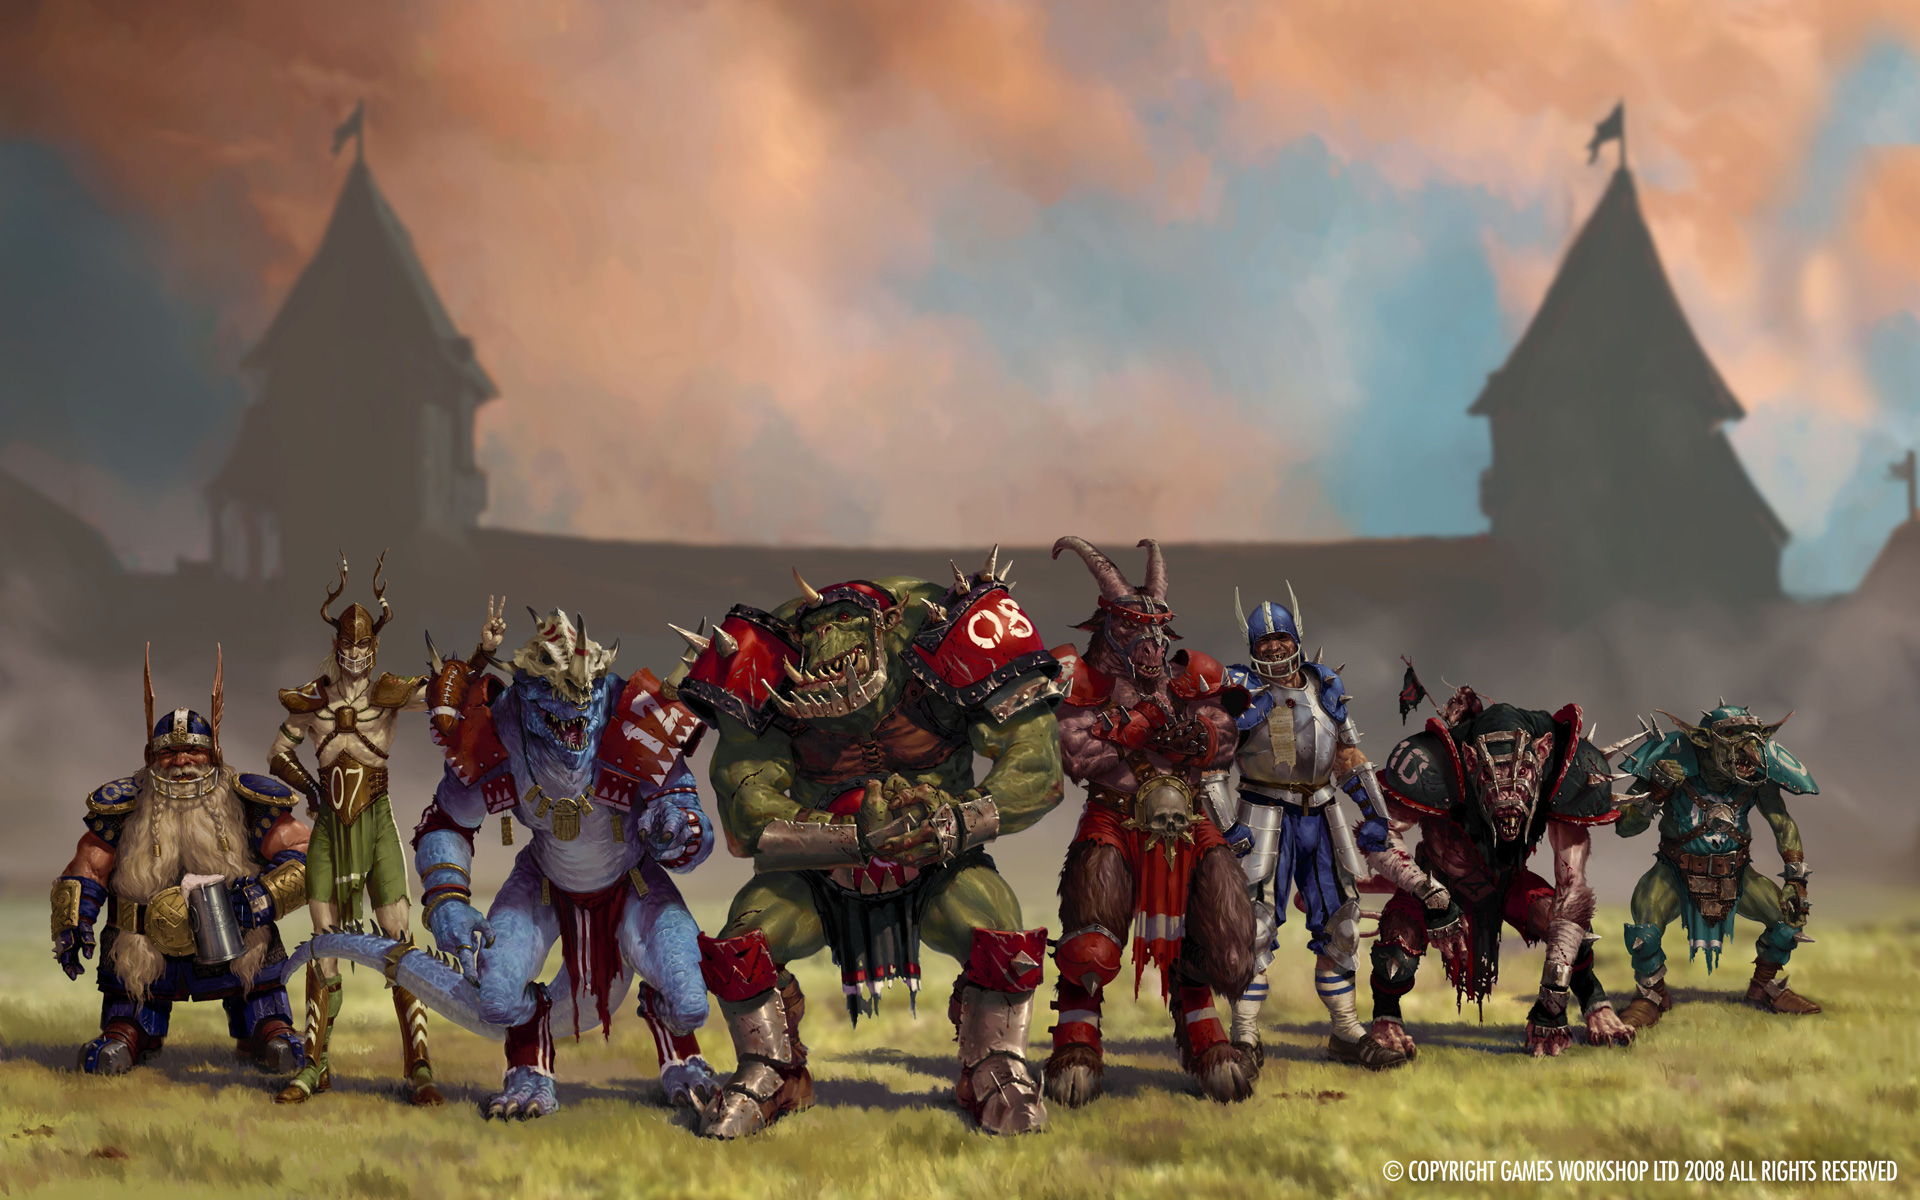 New Blood Bowl 2021 Wallpapers